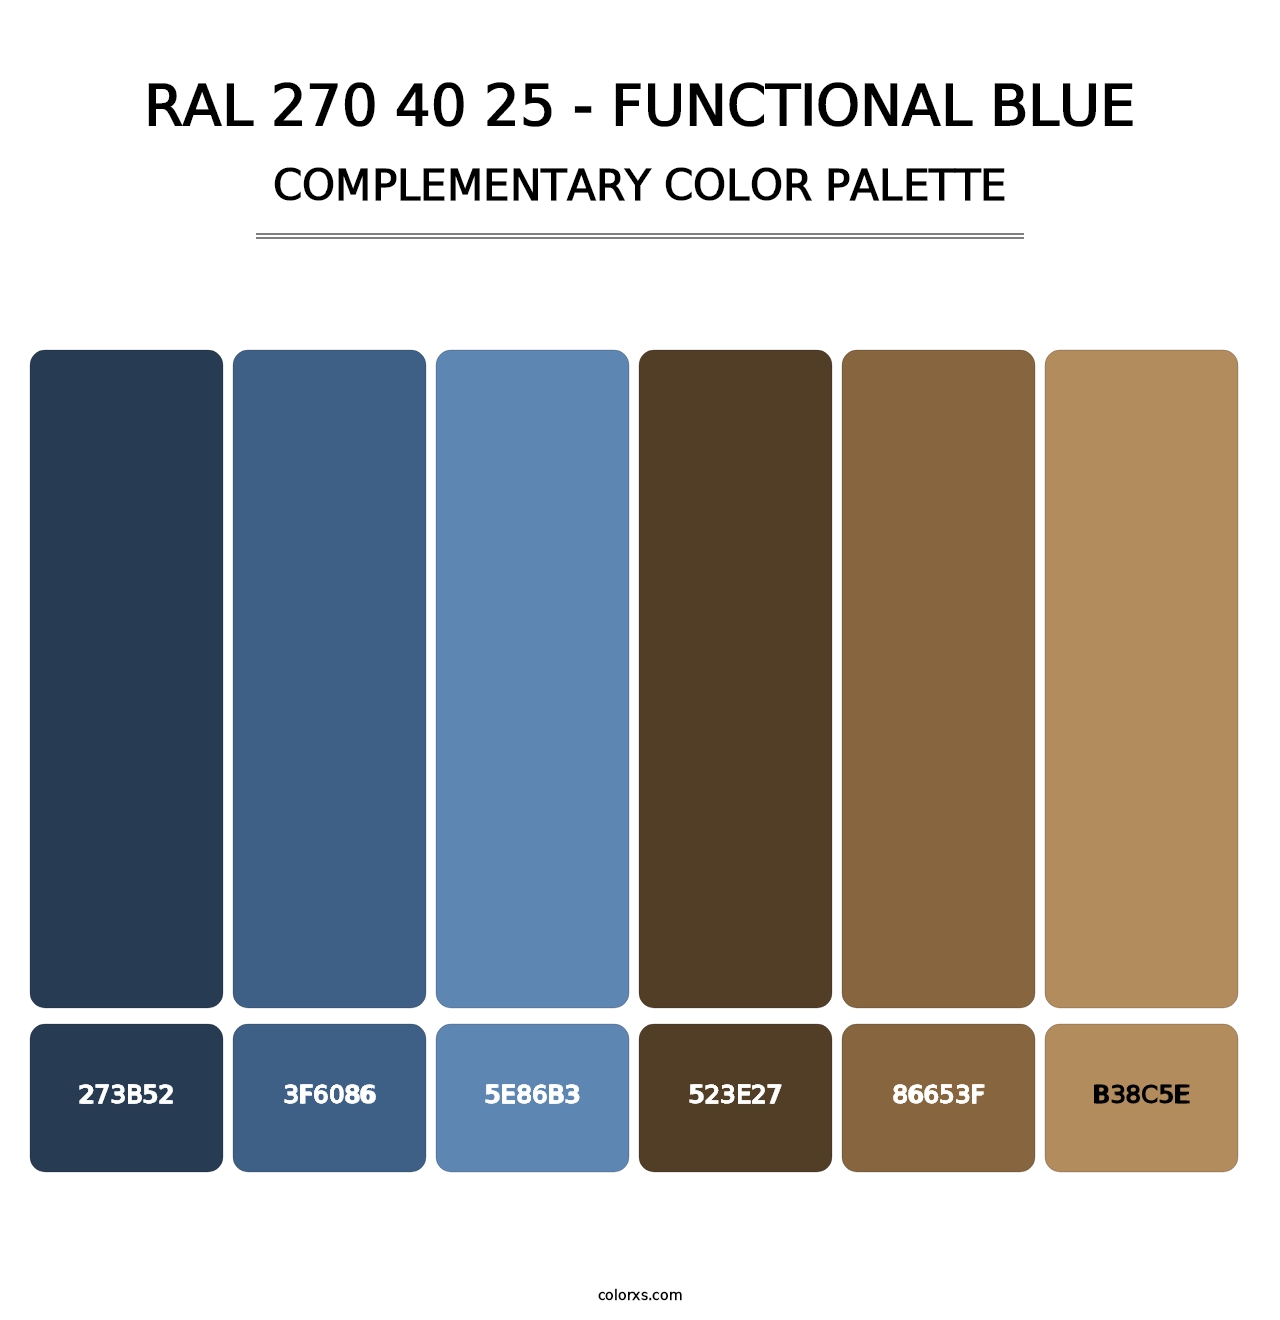 RAL 270 40 25 - Functional Blue - Complementary Color Palette